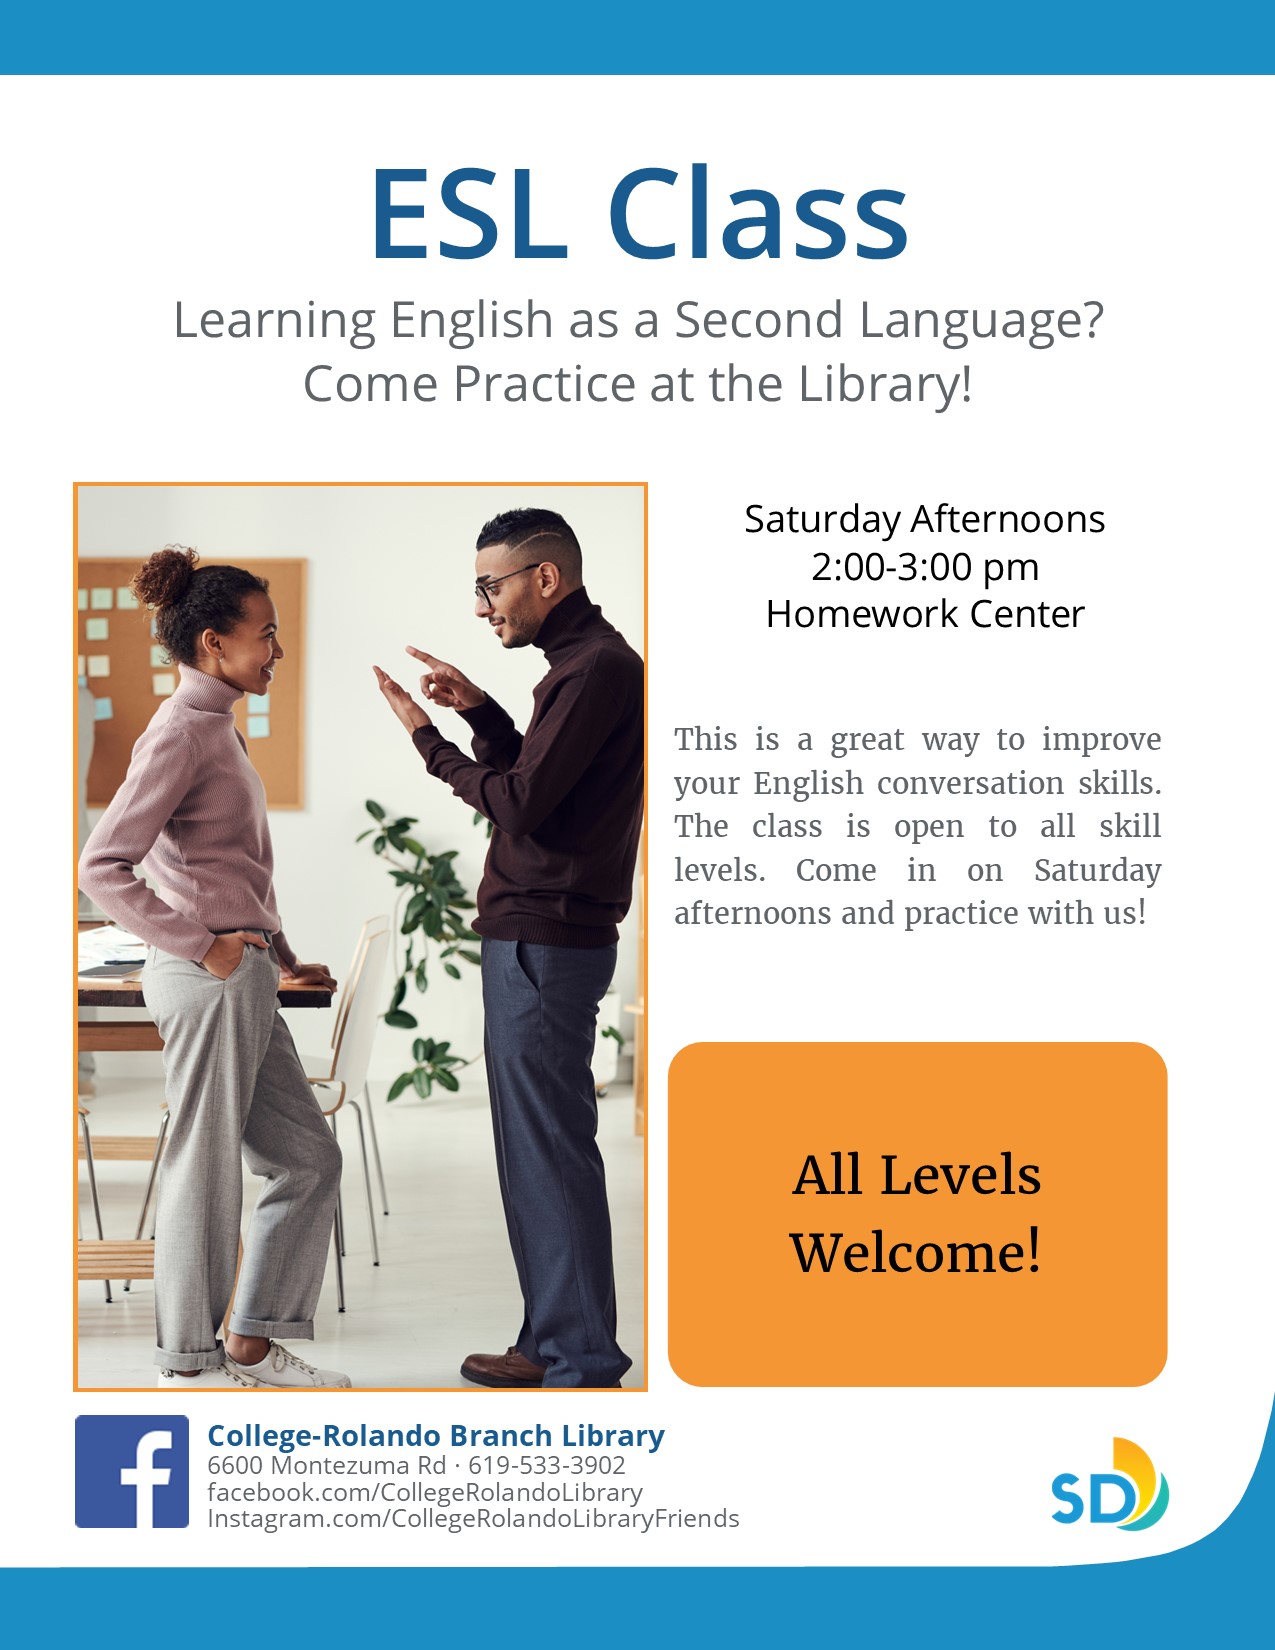 This is a great way to improve your English conversation skills. The class is open to all skill levels. Come in on Saturday afternoons and practice with us!